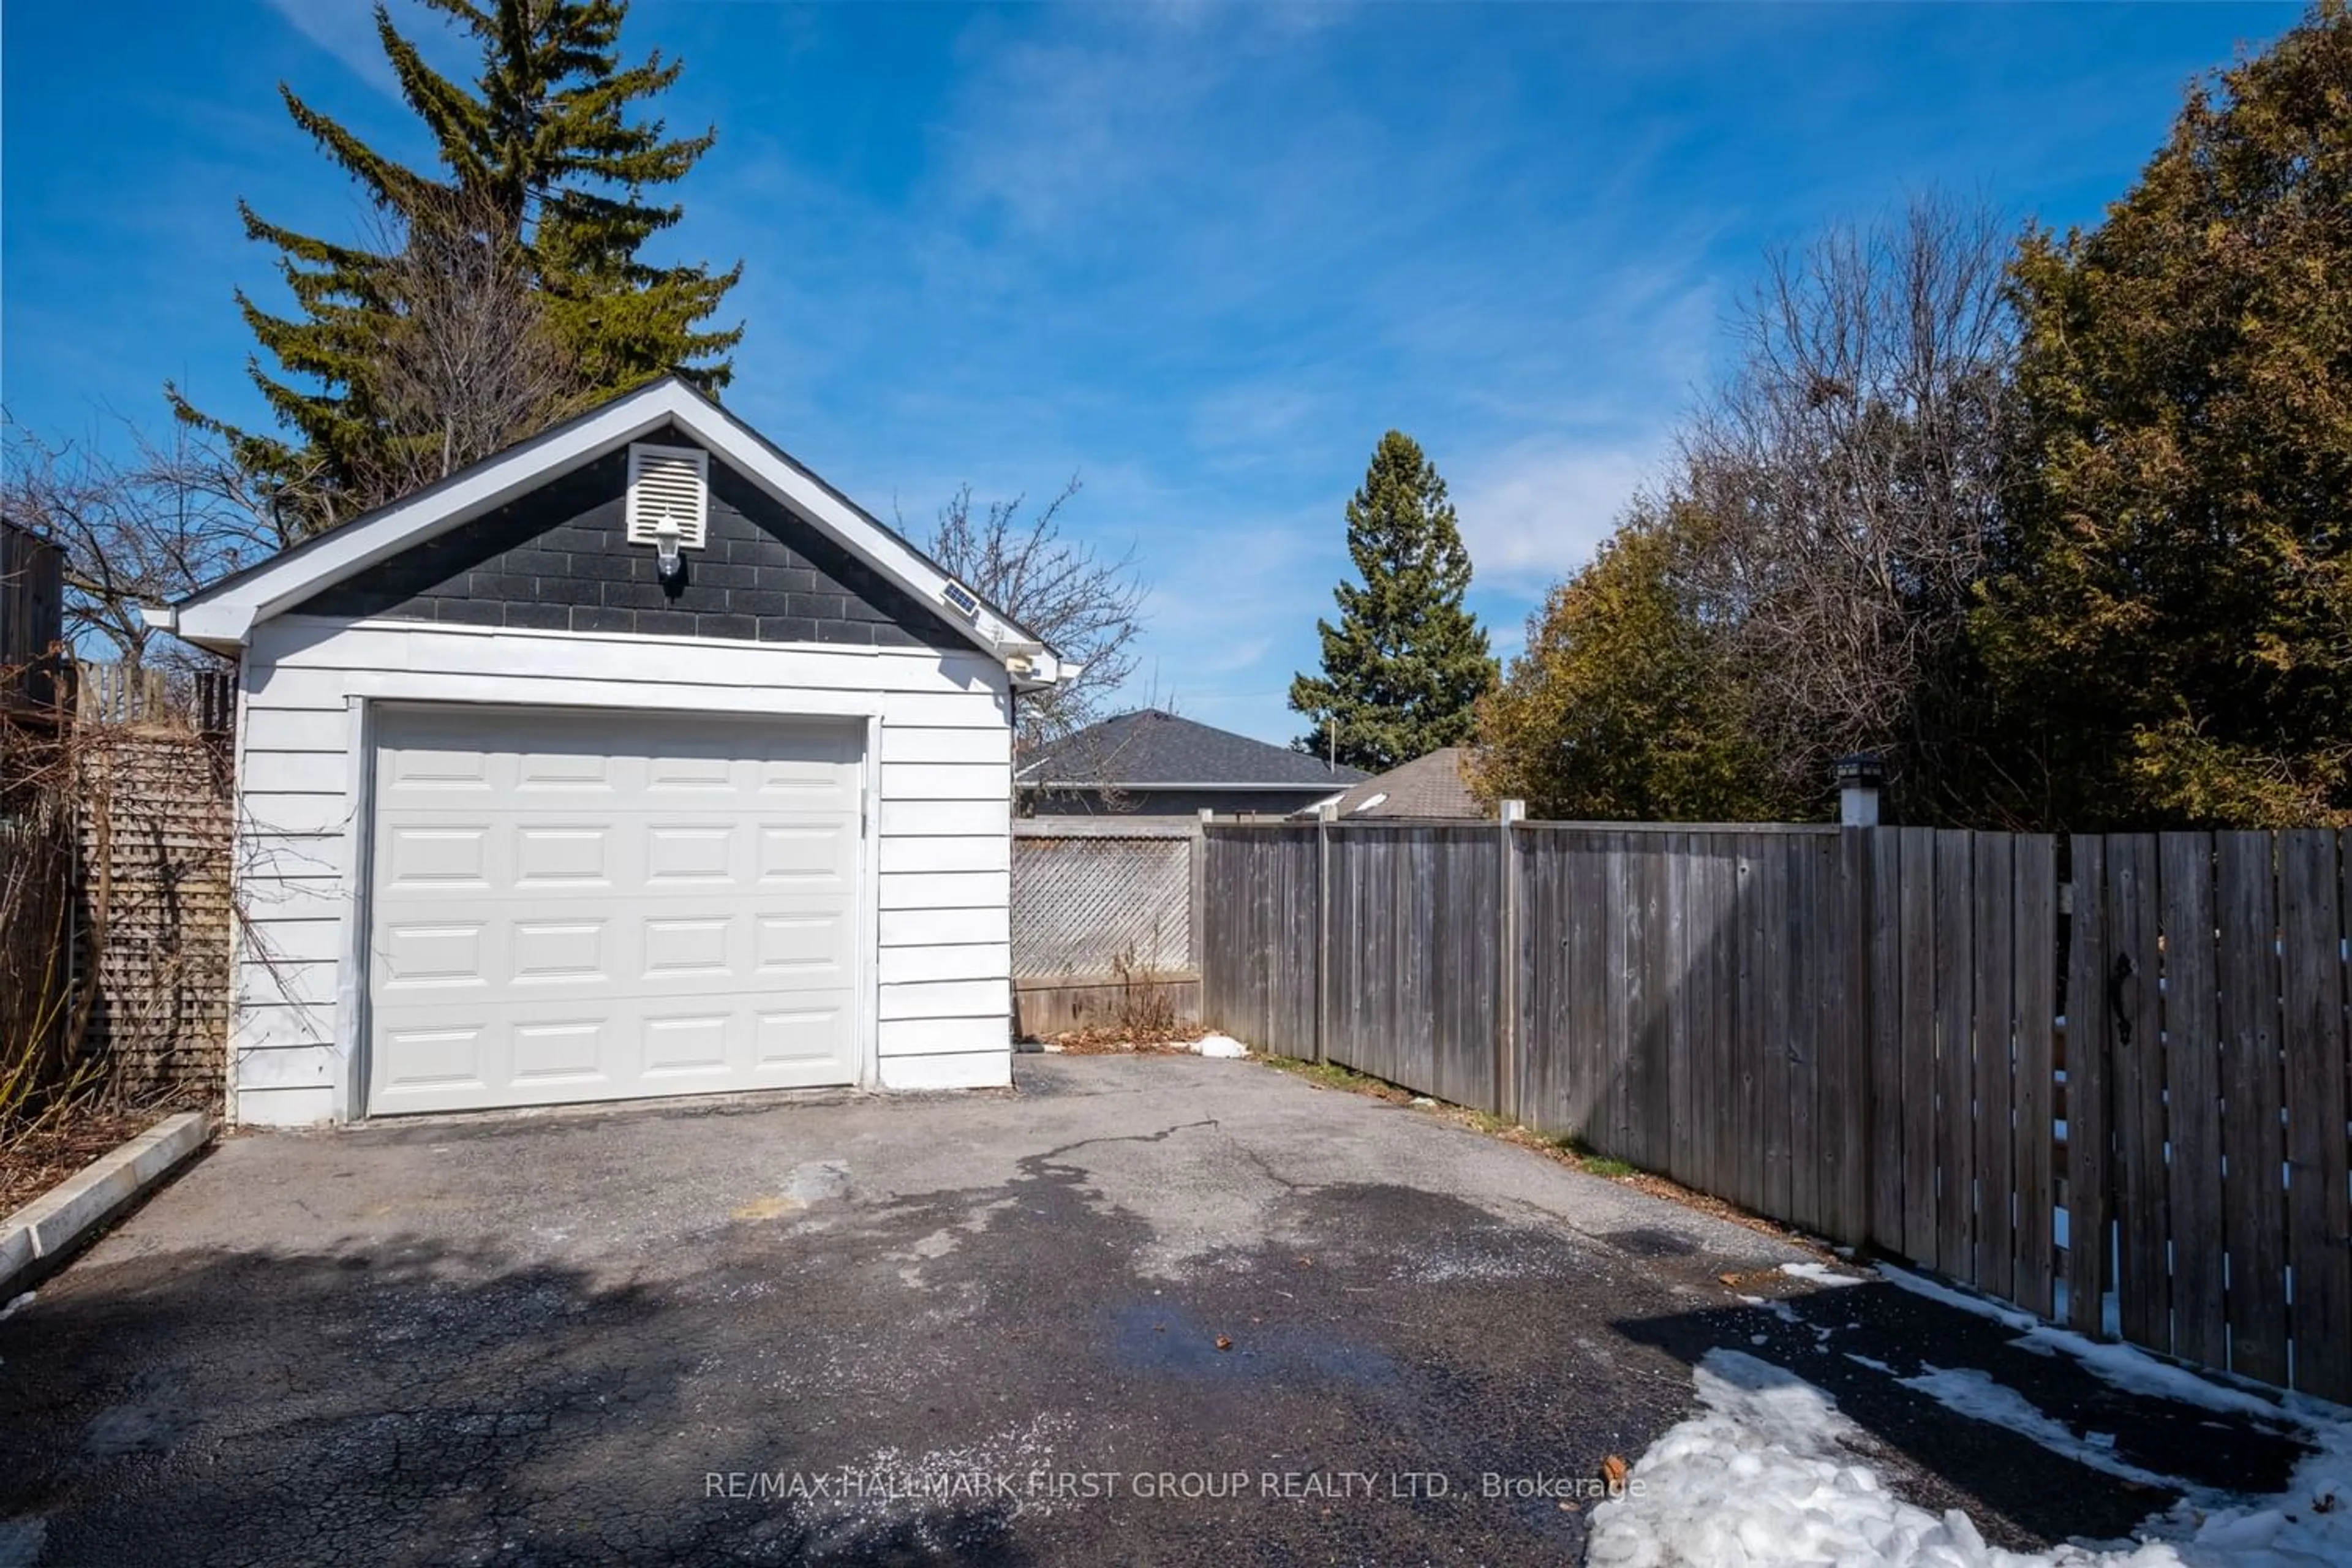 Fenced yard for 294 Wolfe St, Oshawa Ontario L1H 3T7